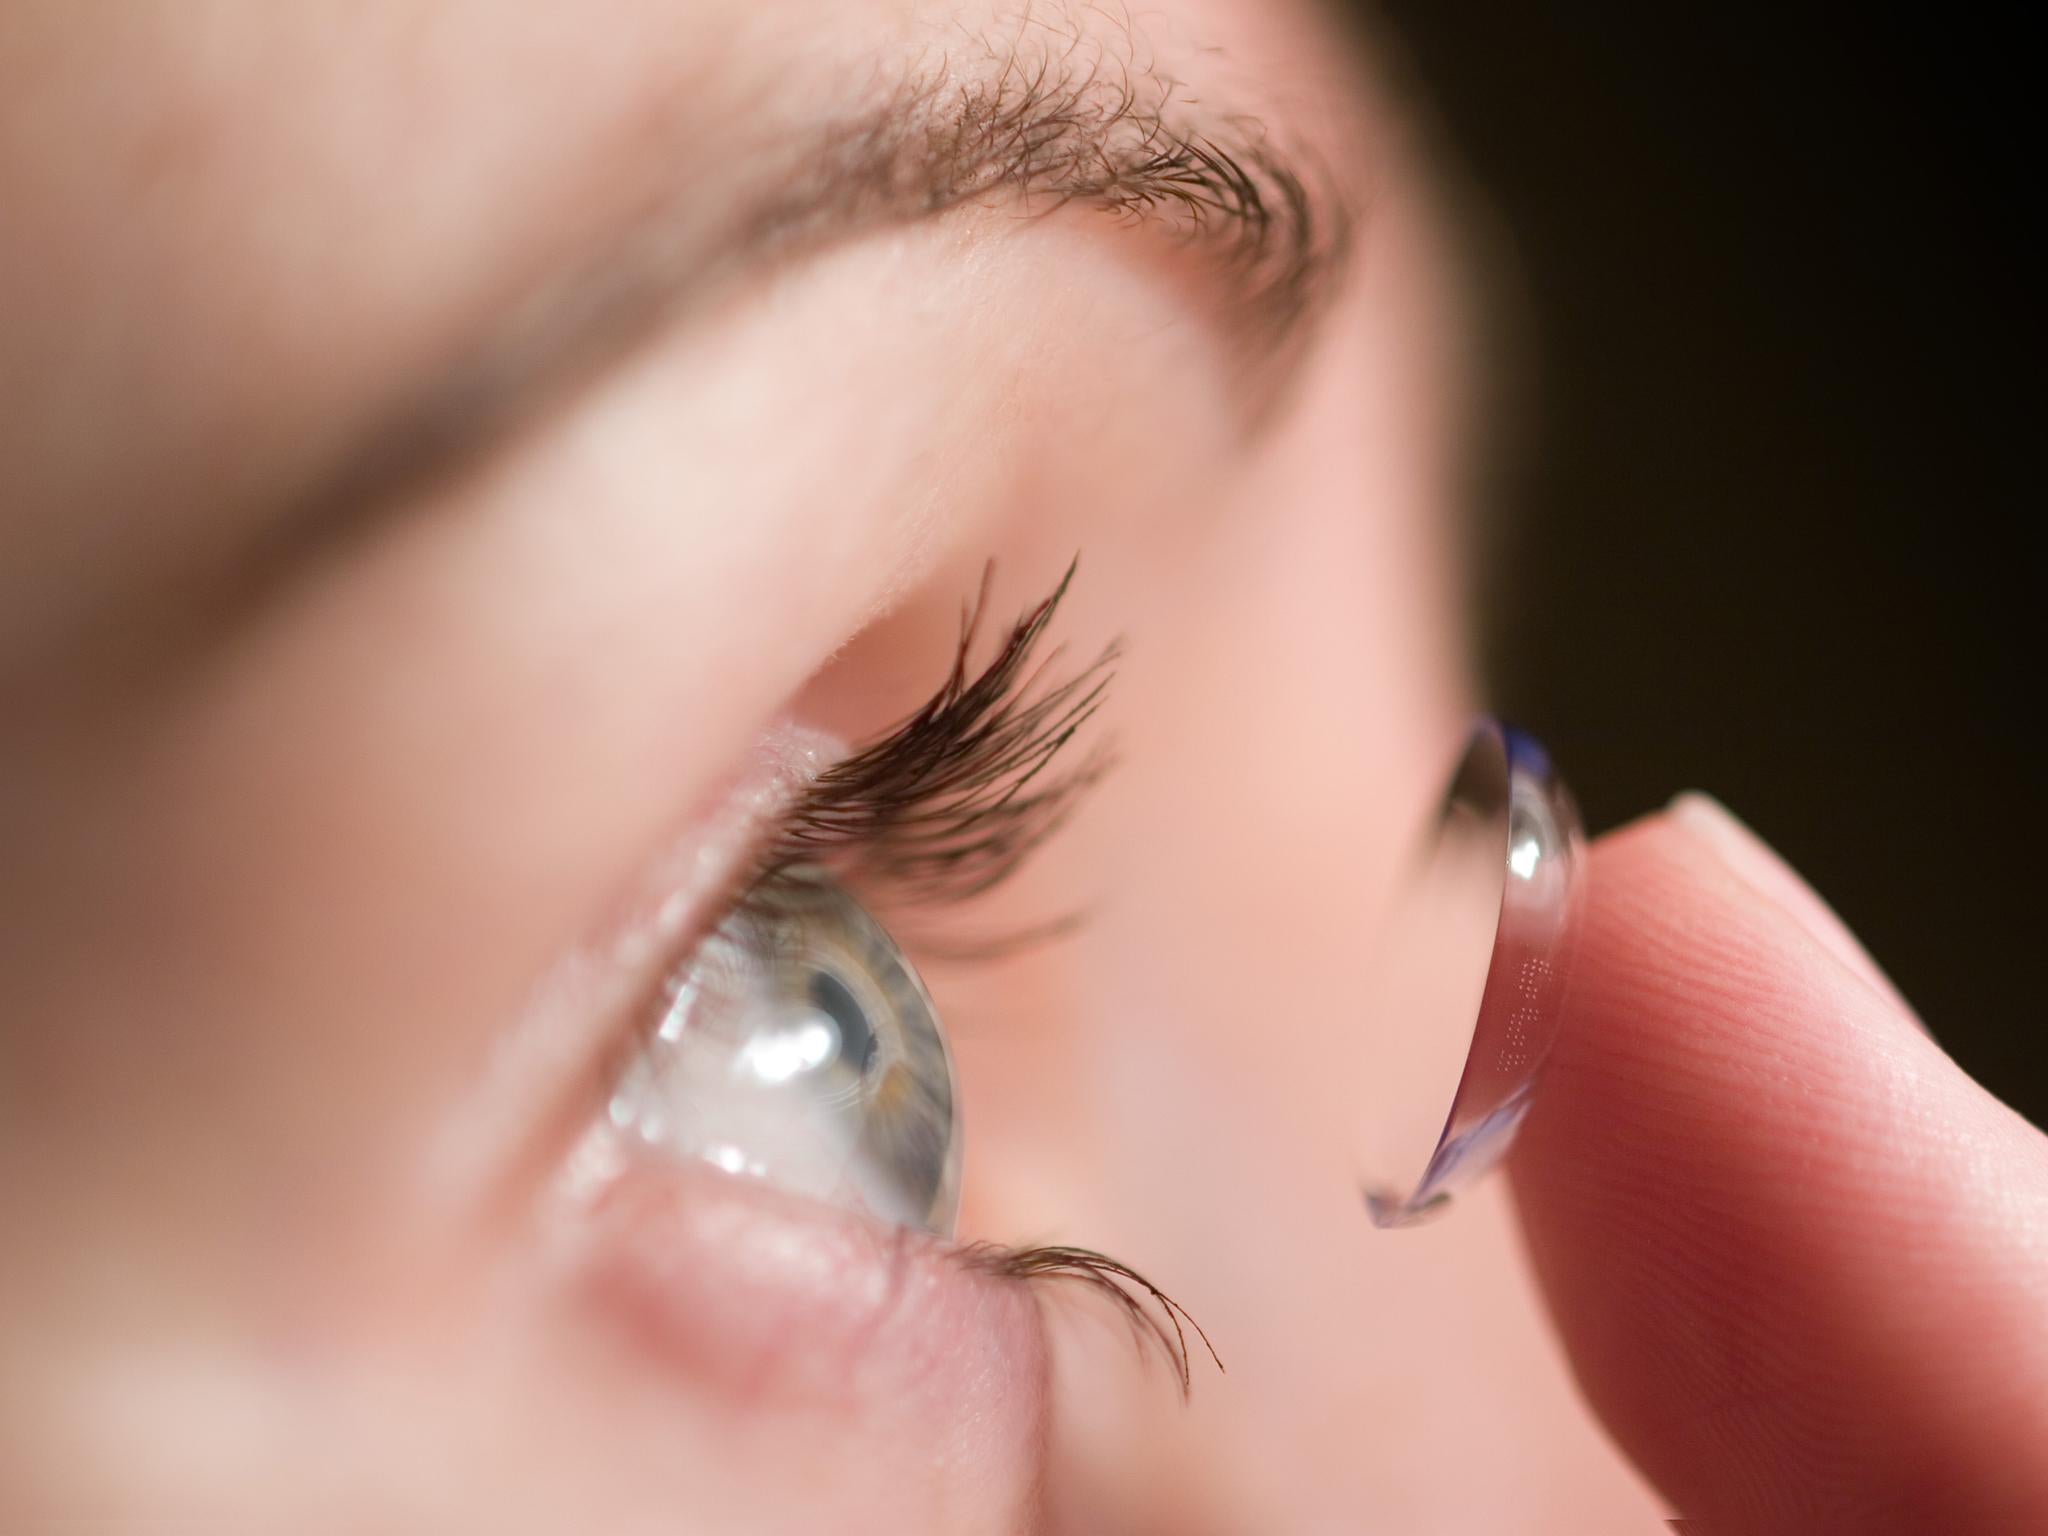 The woman apparently used disposable contact lenses for 35 years